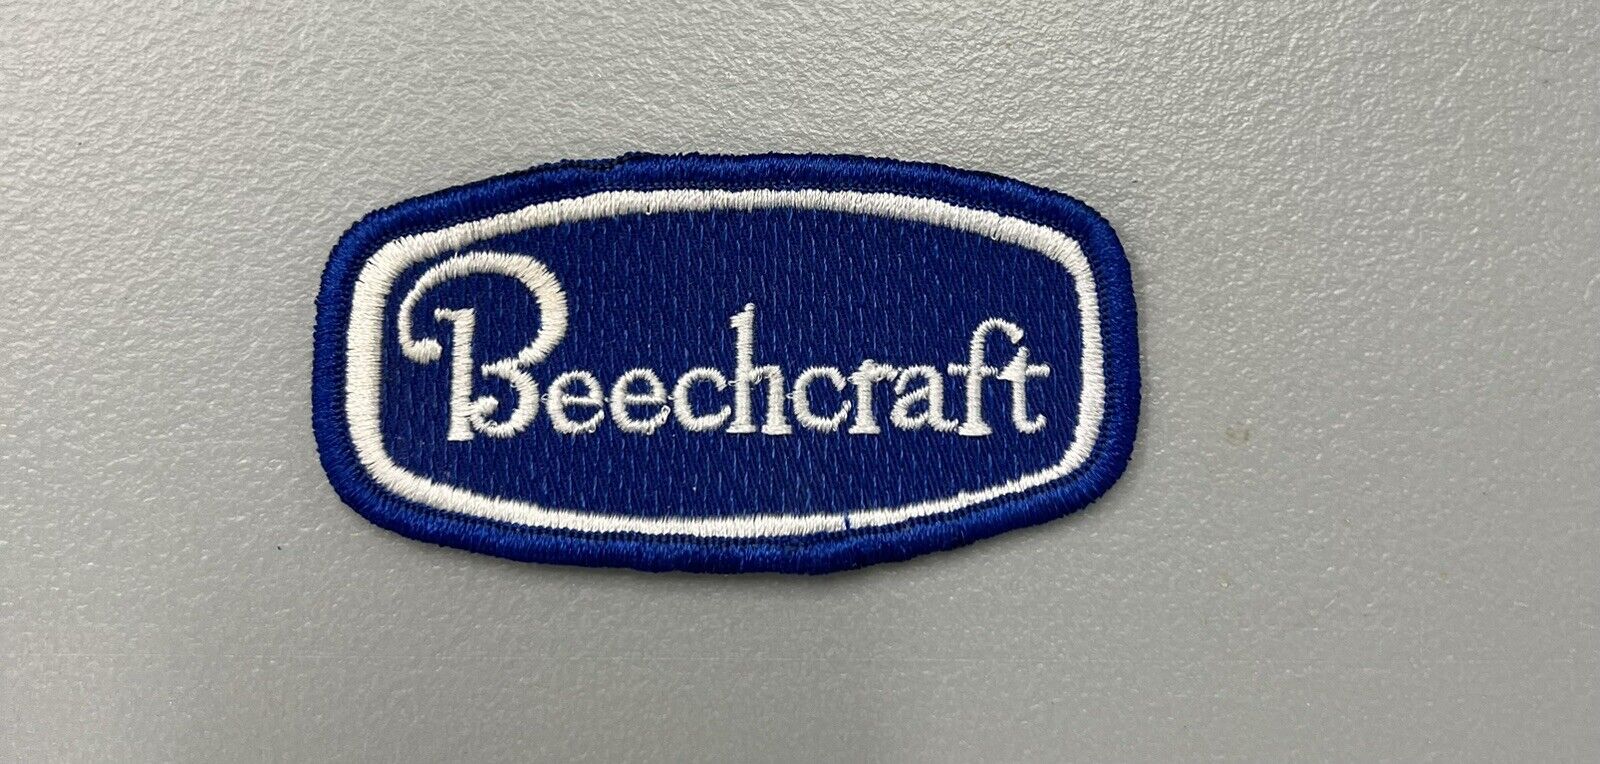 Beechcraft Embroidered Patch Blue & White Aircraft Aviation Airplane